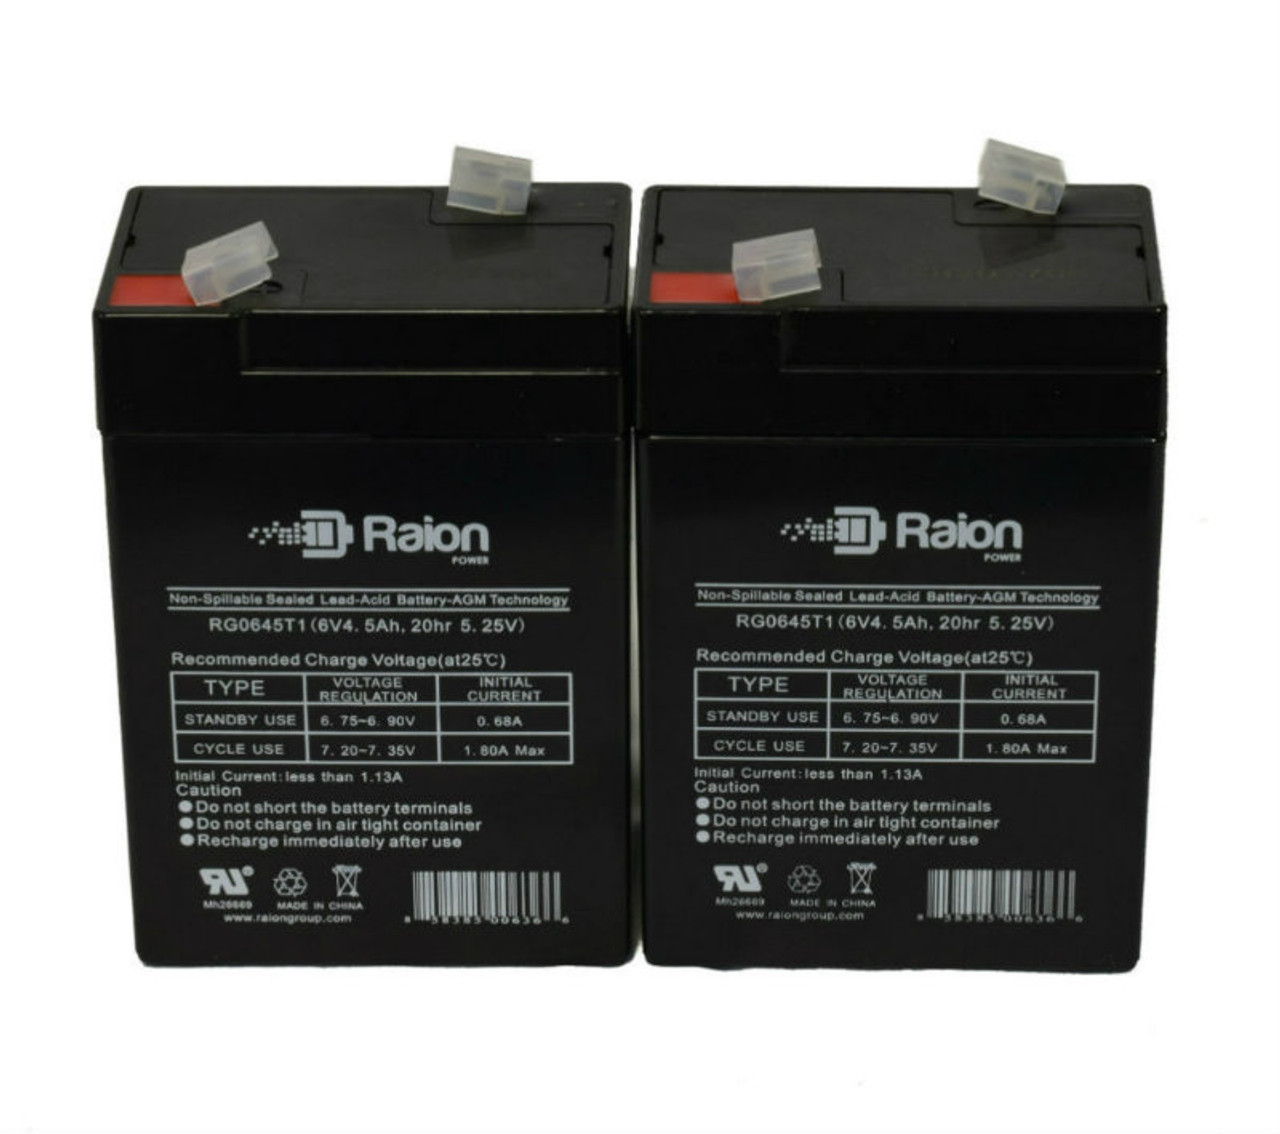 Raion Power 6V 4.5Ah Replacement Emergency Light Battery for Lithonia ELB06042 - 2 Pack